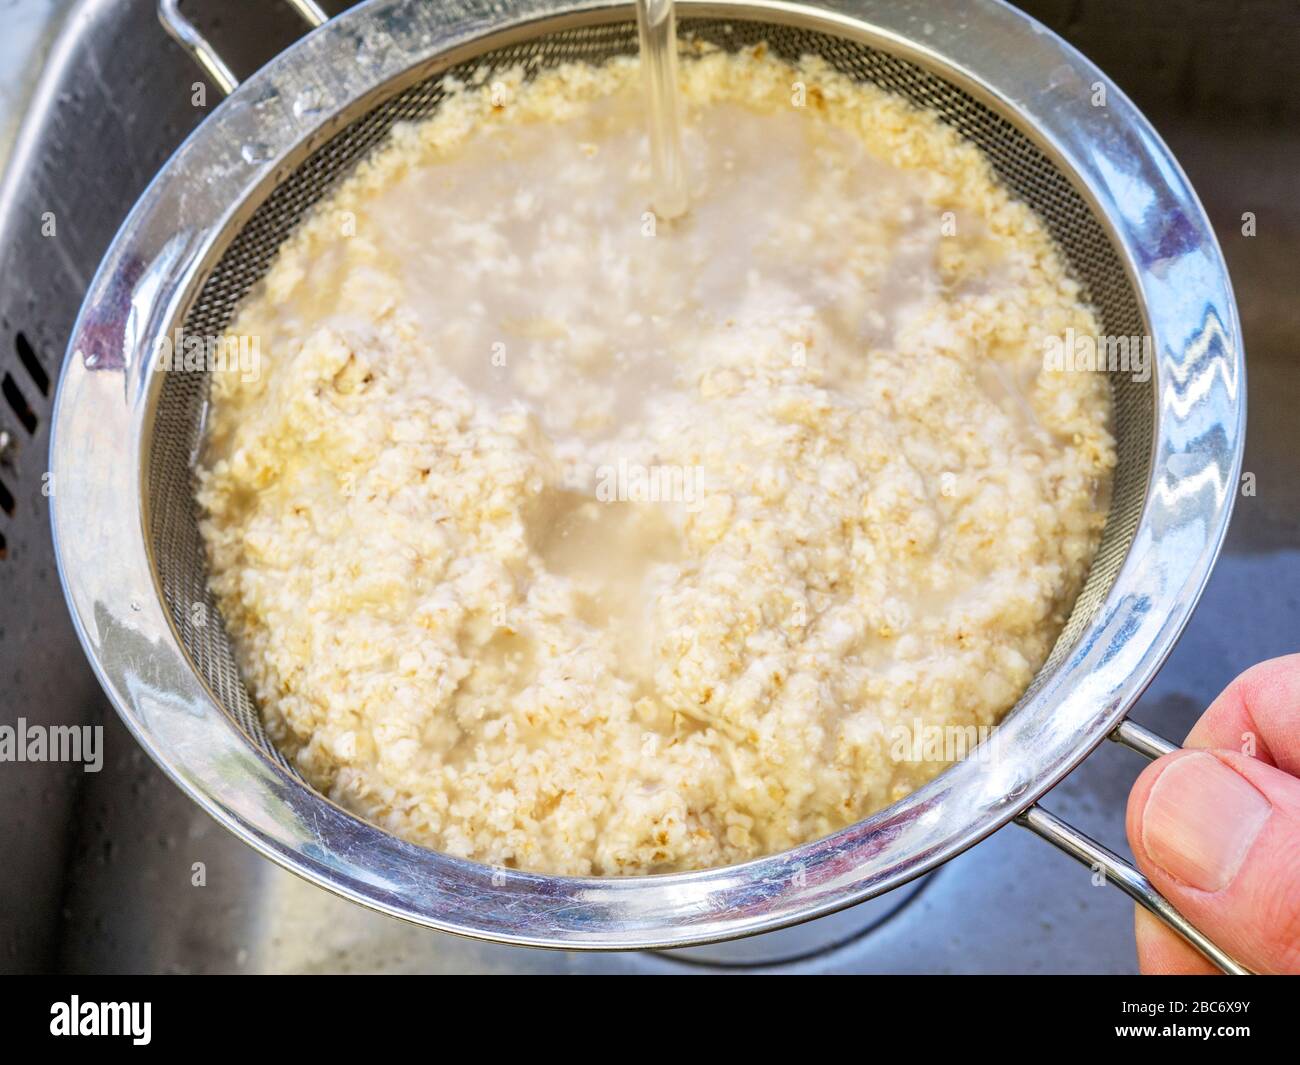 Draining and rinsing soaked rolled oats in a sieve over a kitchen sink for making dairy alternative oat cream Stock Photo